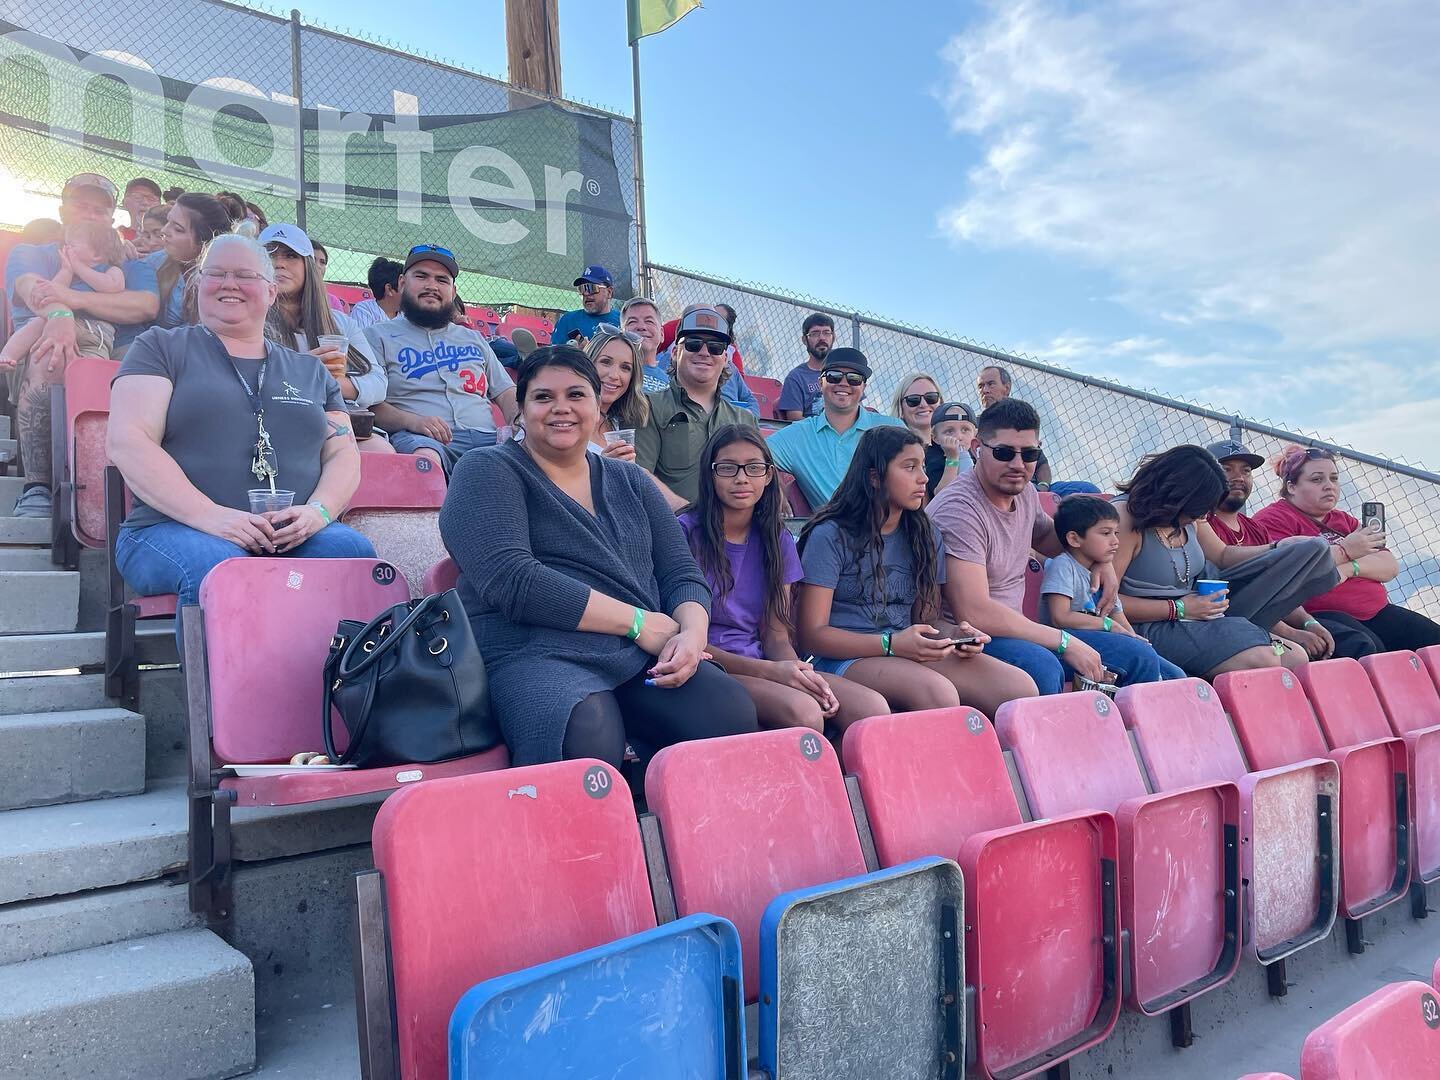 Thank you, @theboisehawks for an amazing company event. We had a blast, the weather was perfect and the Hawks won! #teambuilding #landscapers #landscapeconstruction #boise #idaho